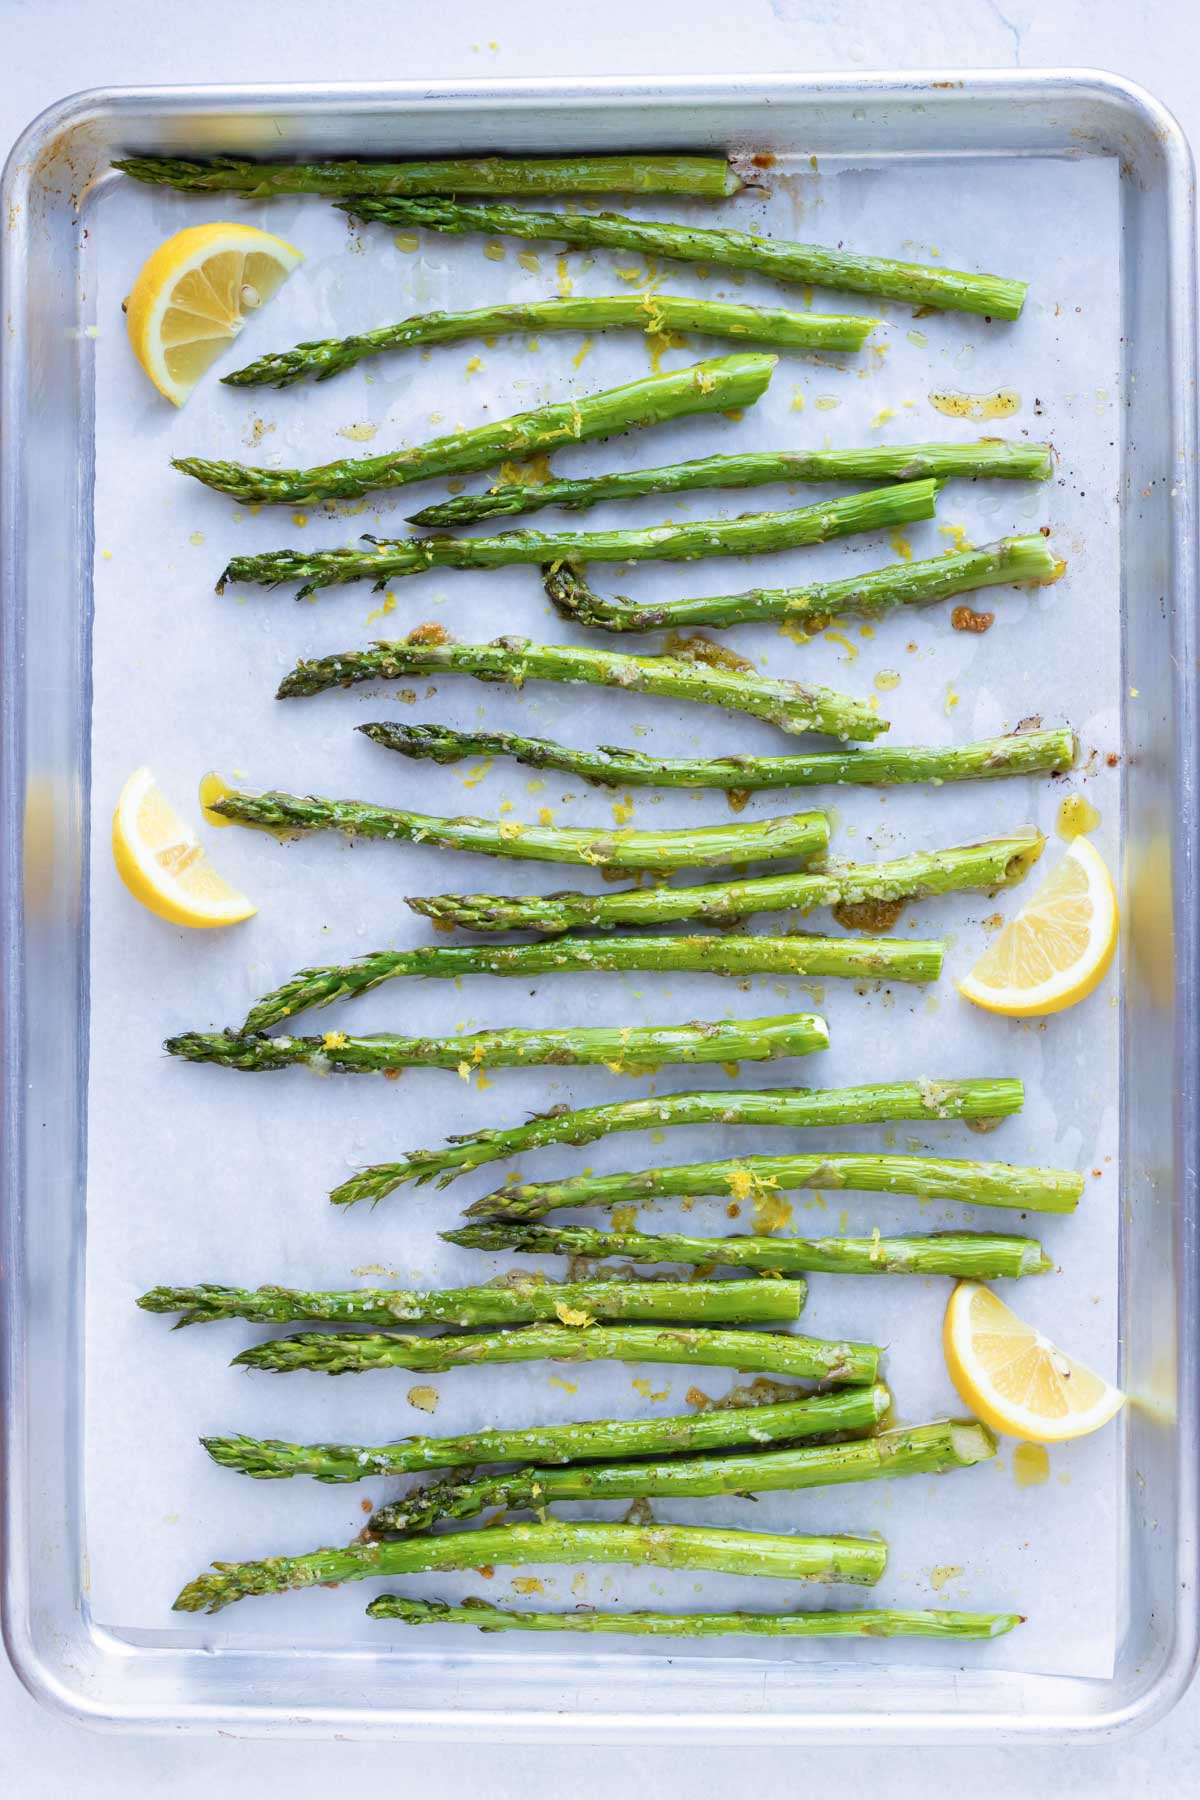 Asparagus that has been roasted in the oven on a baking sheet with lemon wedges.